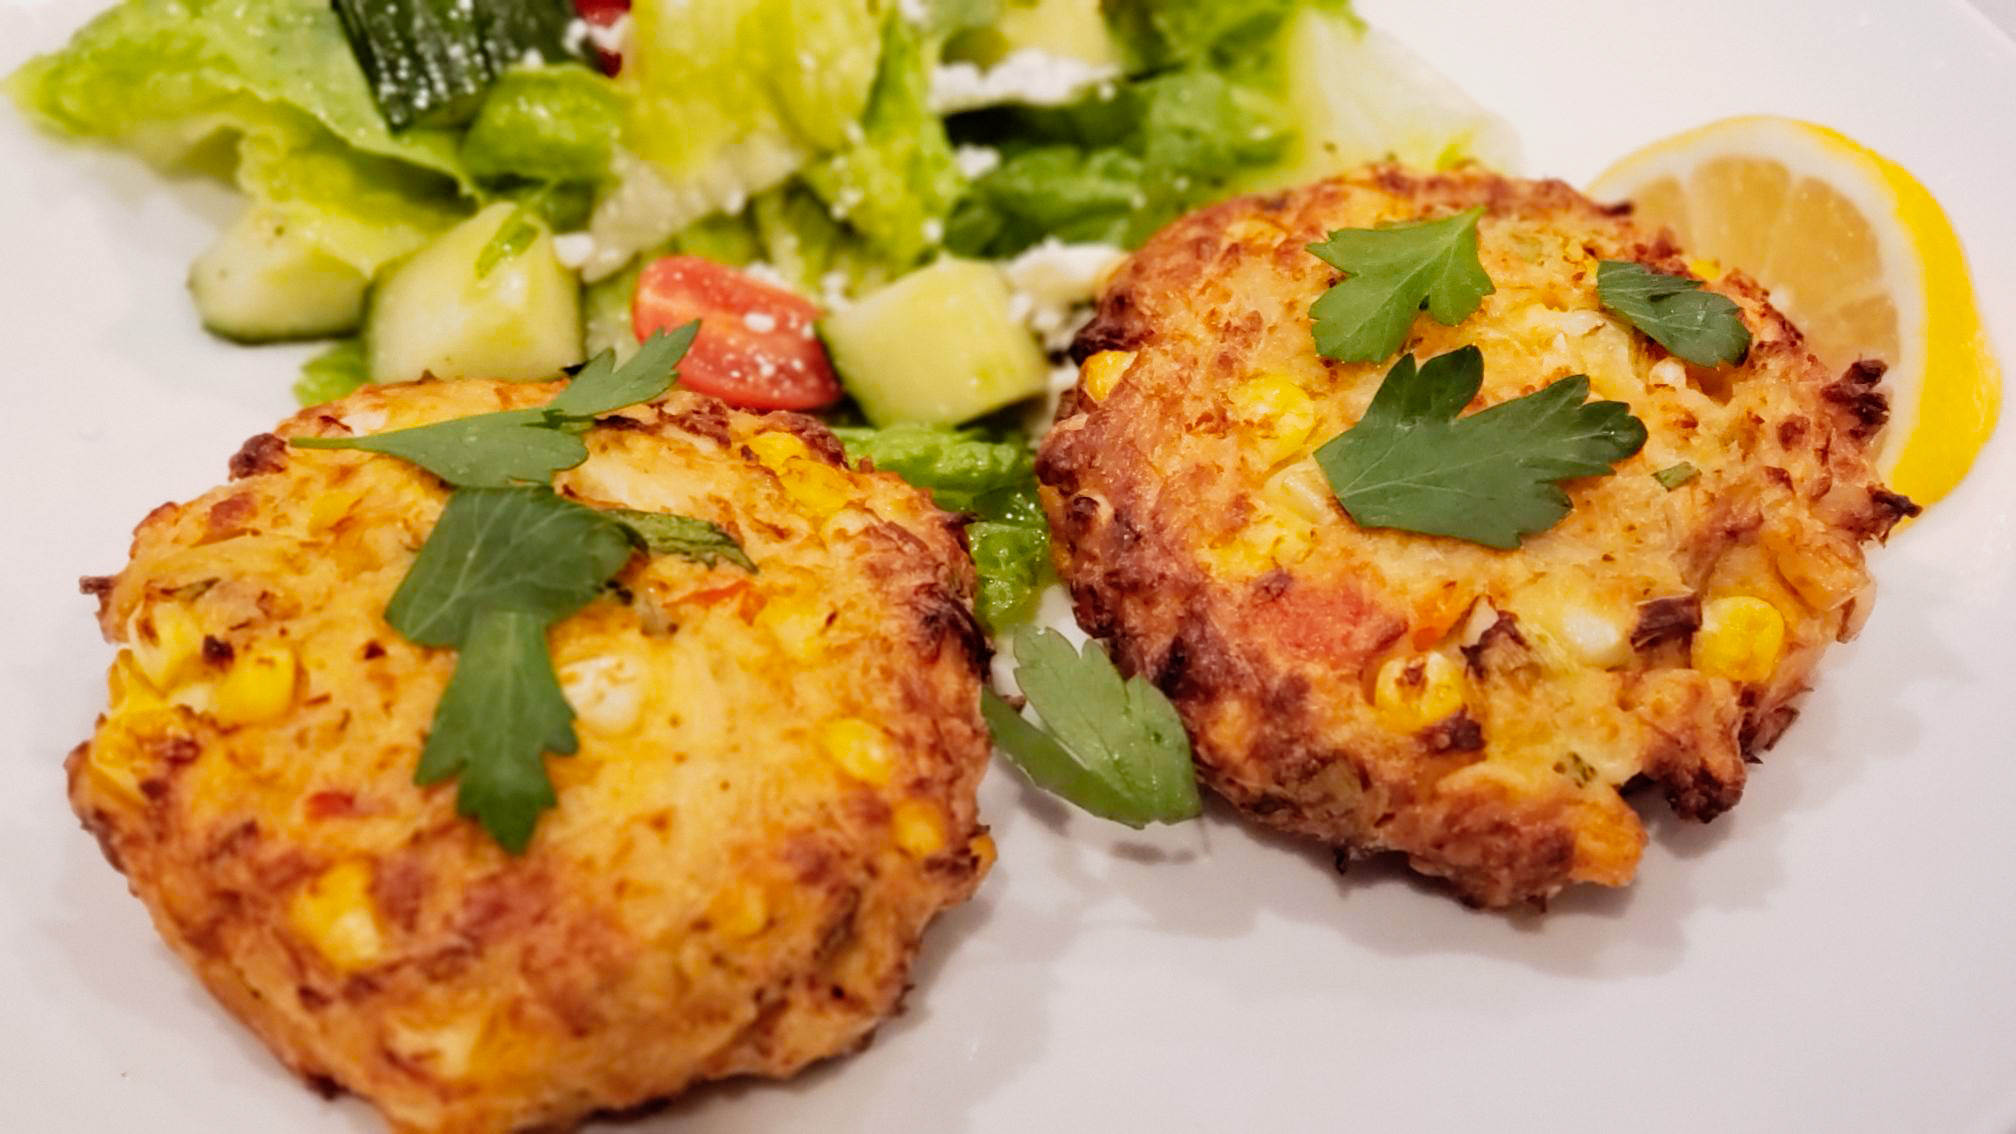 Baked (or Air Fryer) Corn & Crab Cakes with Garlic Aioli – The Tasty Bits